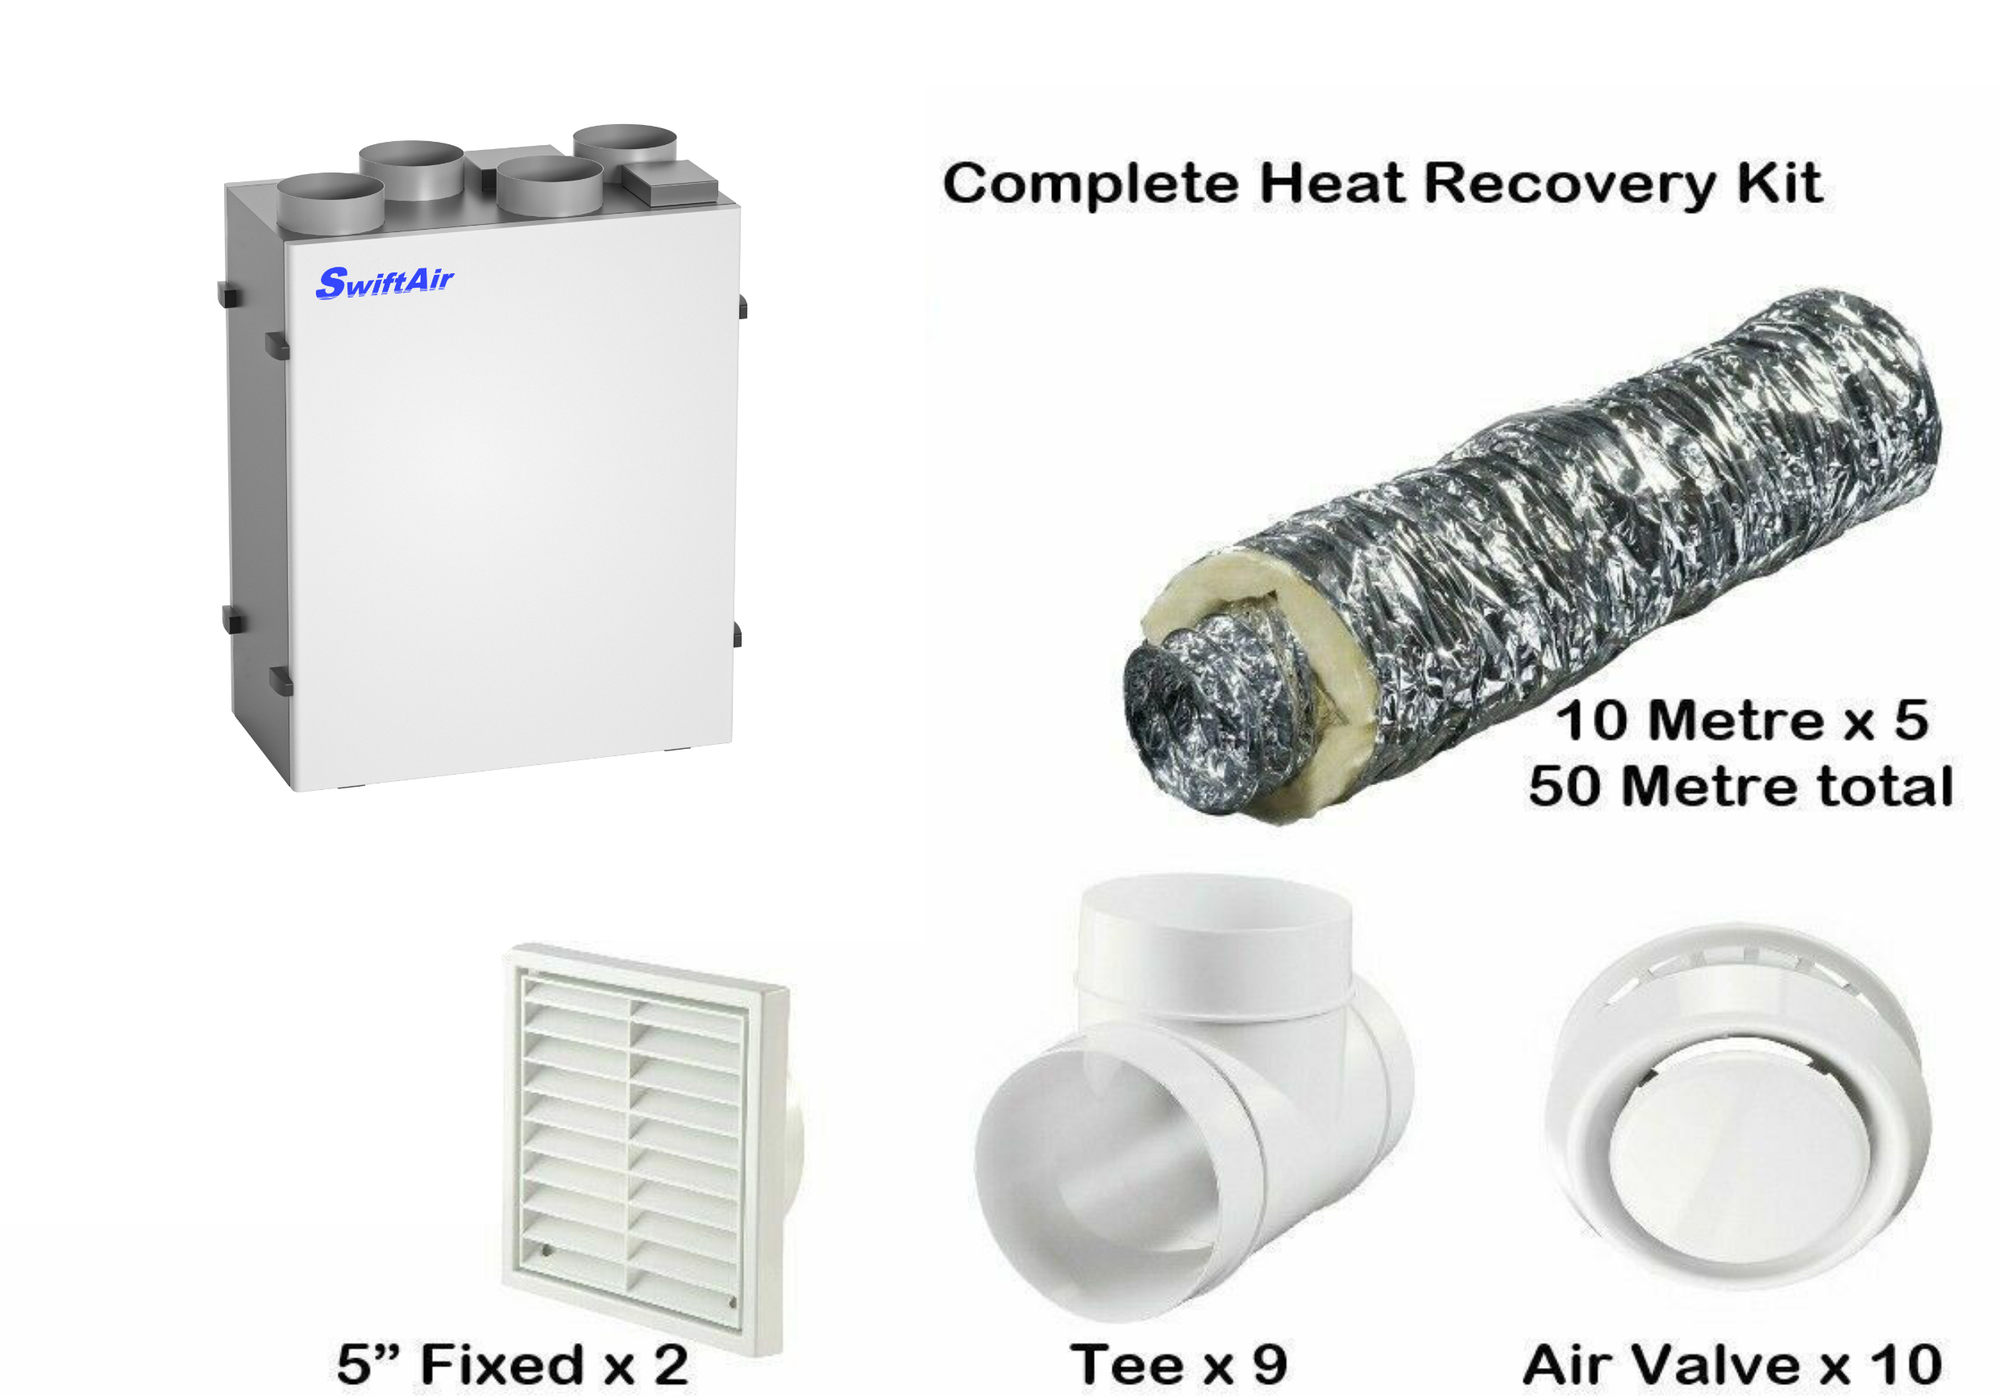 CFLO-EC240 Whole House Heat Recovery Kit - 10 Room (10 Internal Grilles)